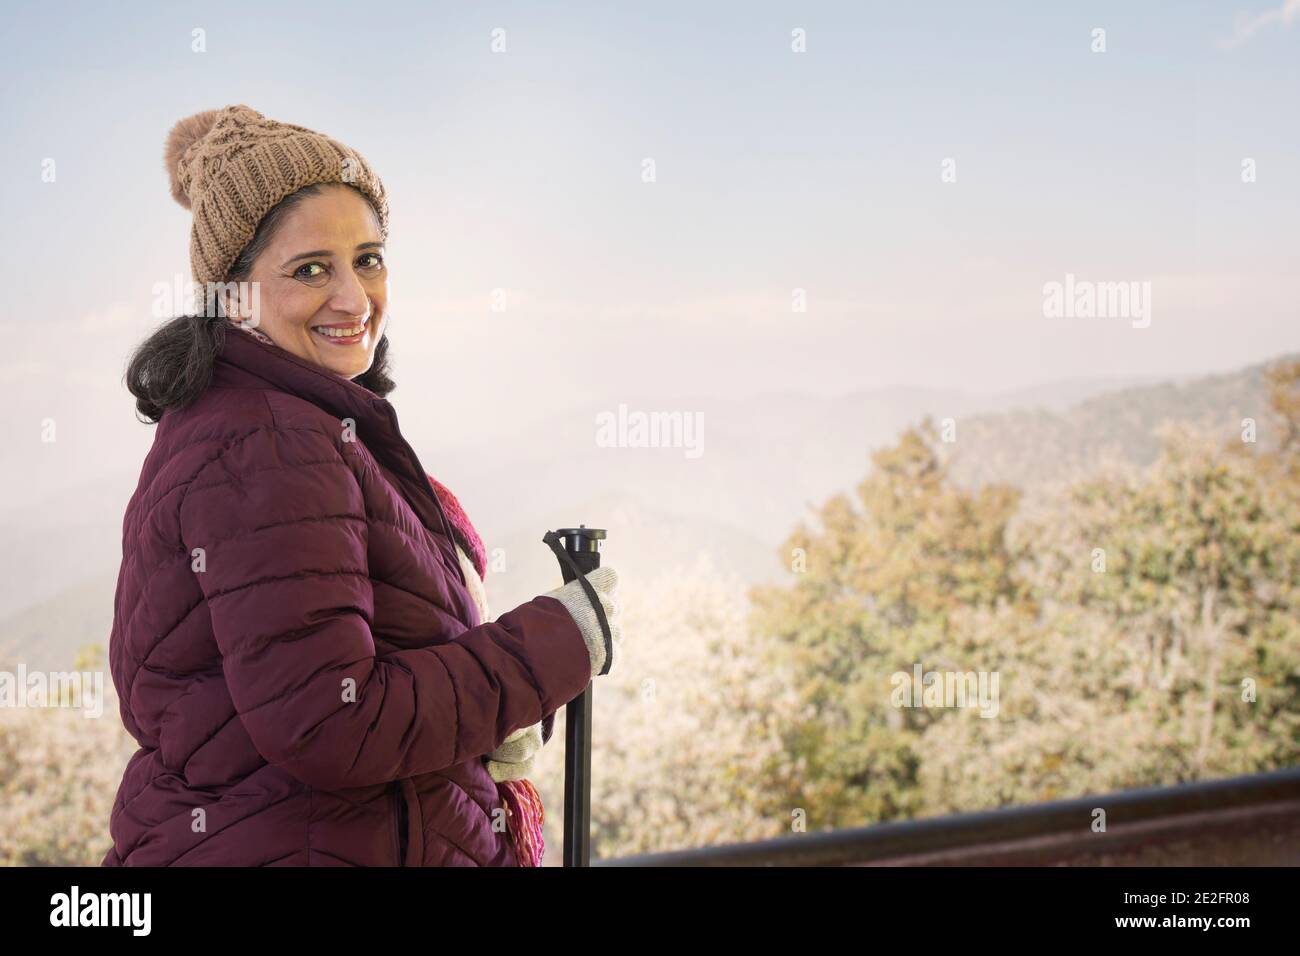 A SENIOR ADULT WOMAN HAPPILY LOOKING BEHIND WHILE TREKKING Stock Photo